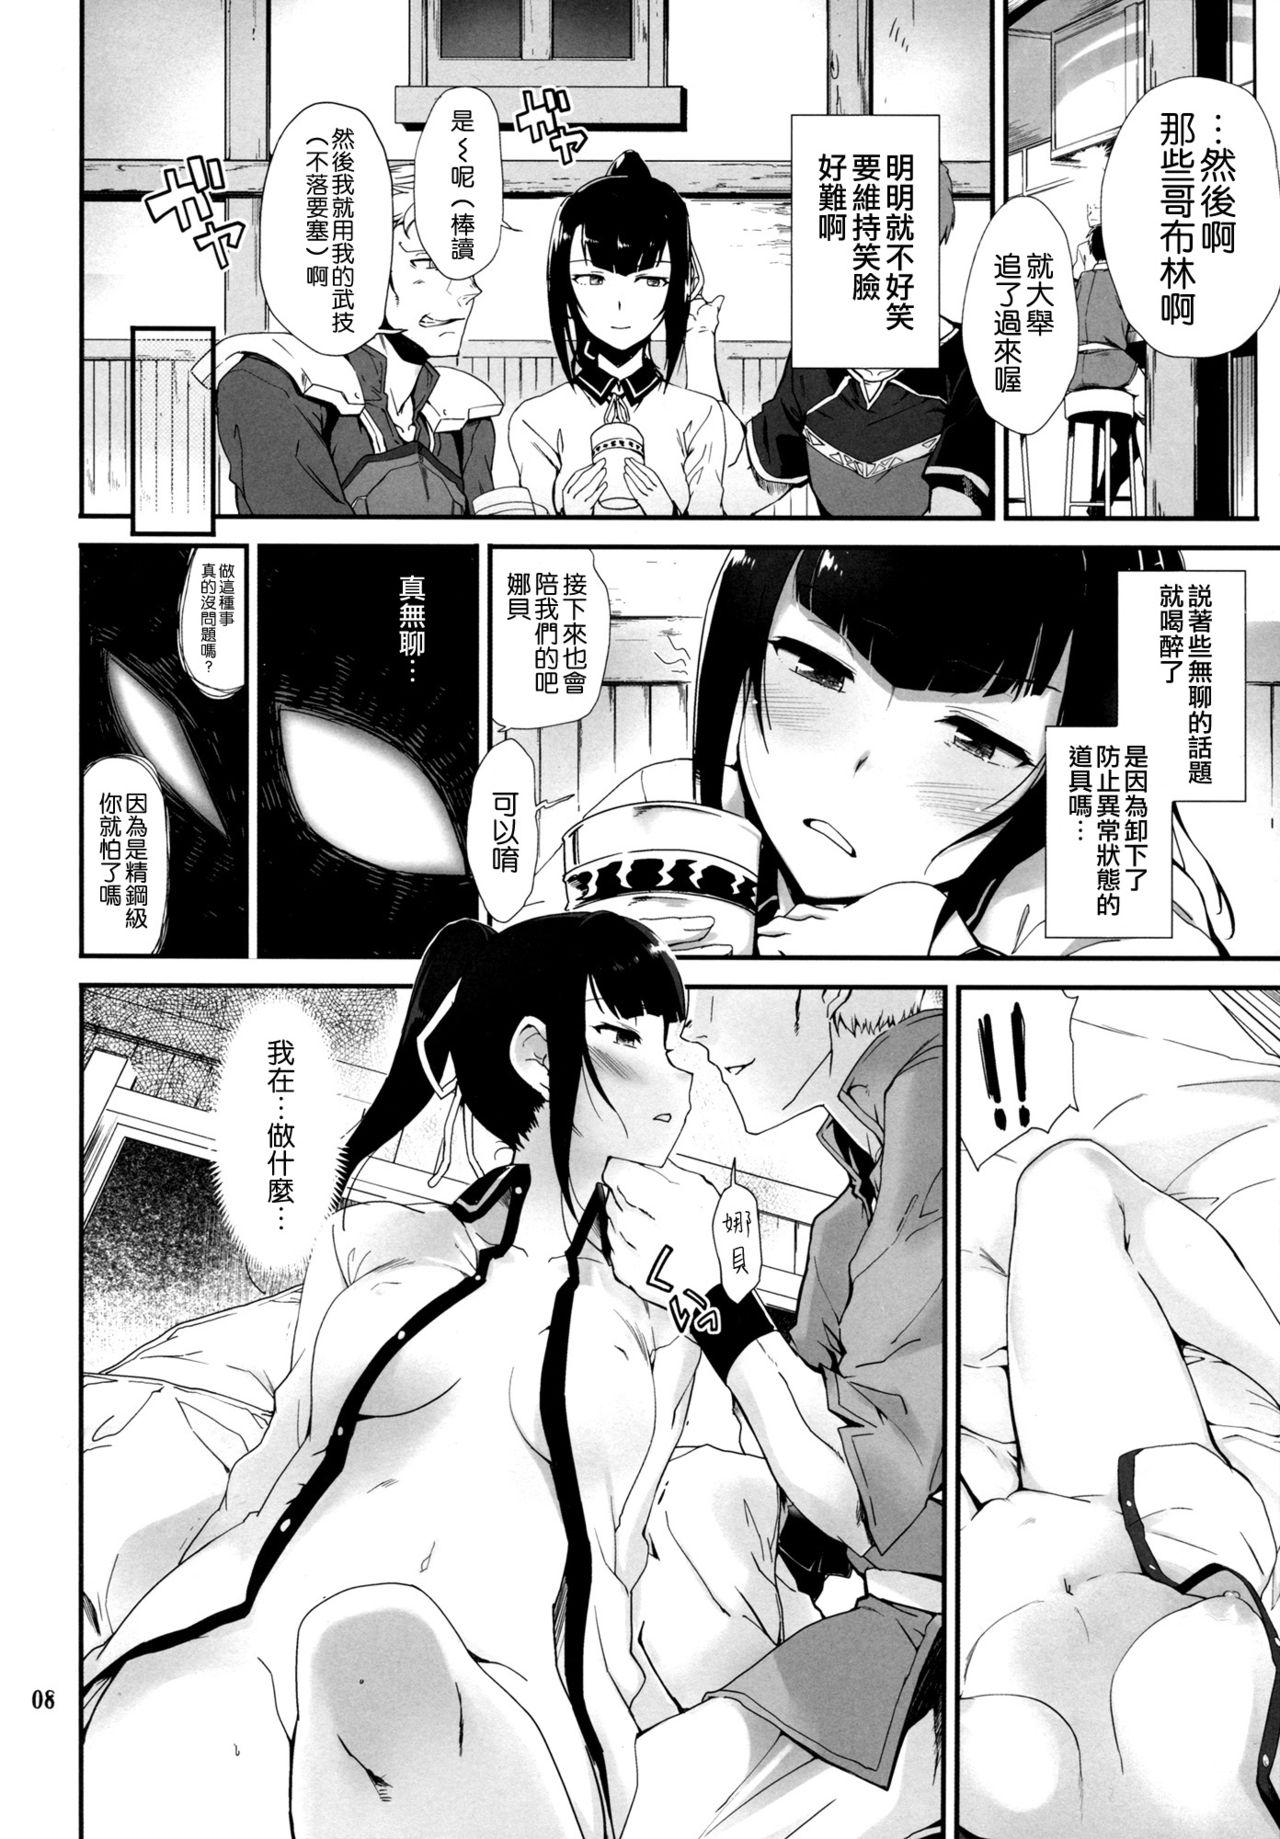 Solo Female Narberal no Kougou - Overlord Cuckold - Page 7